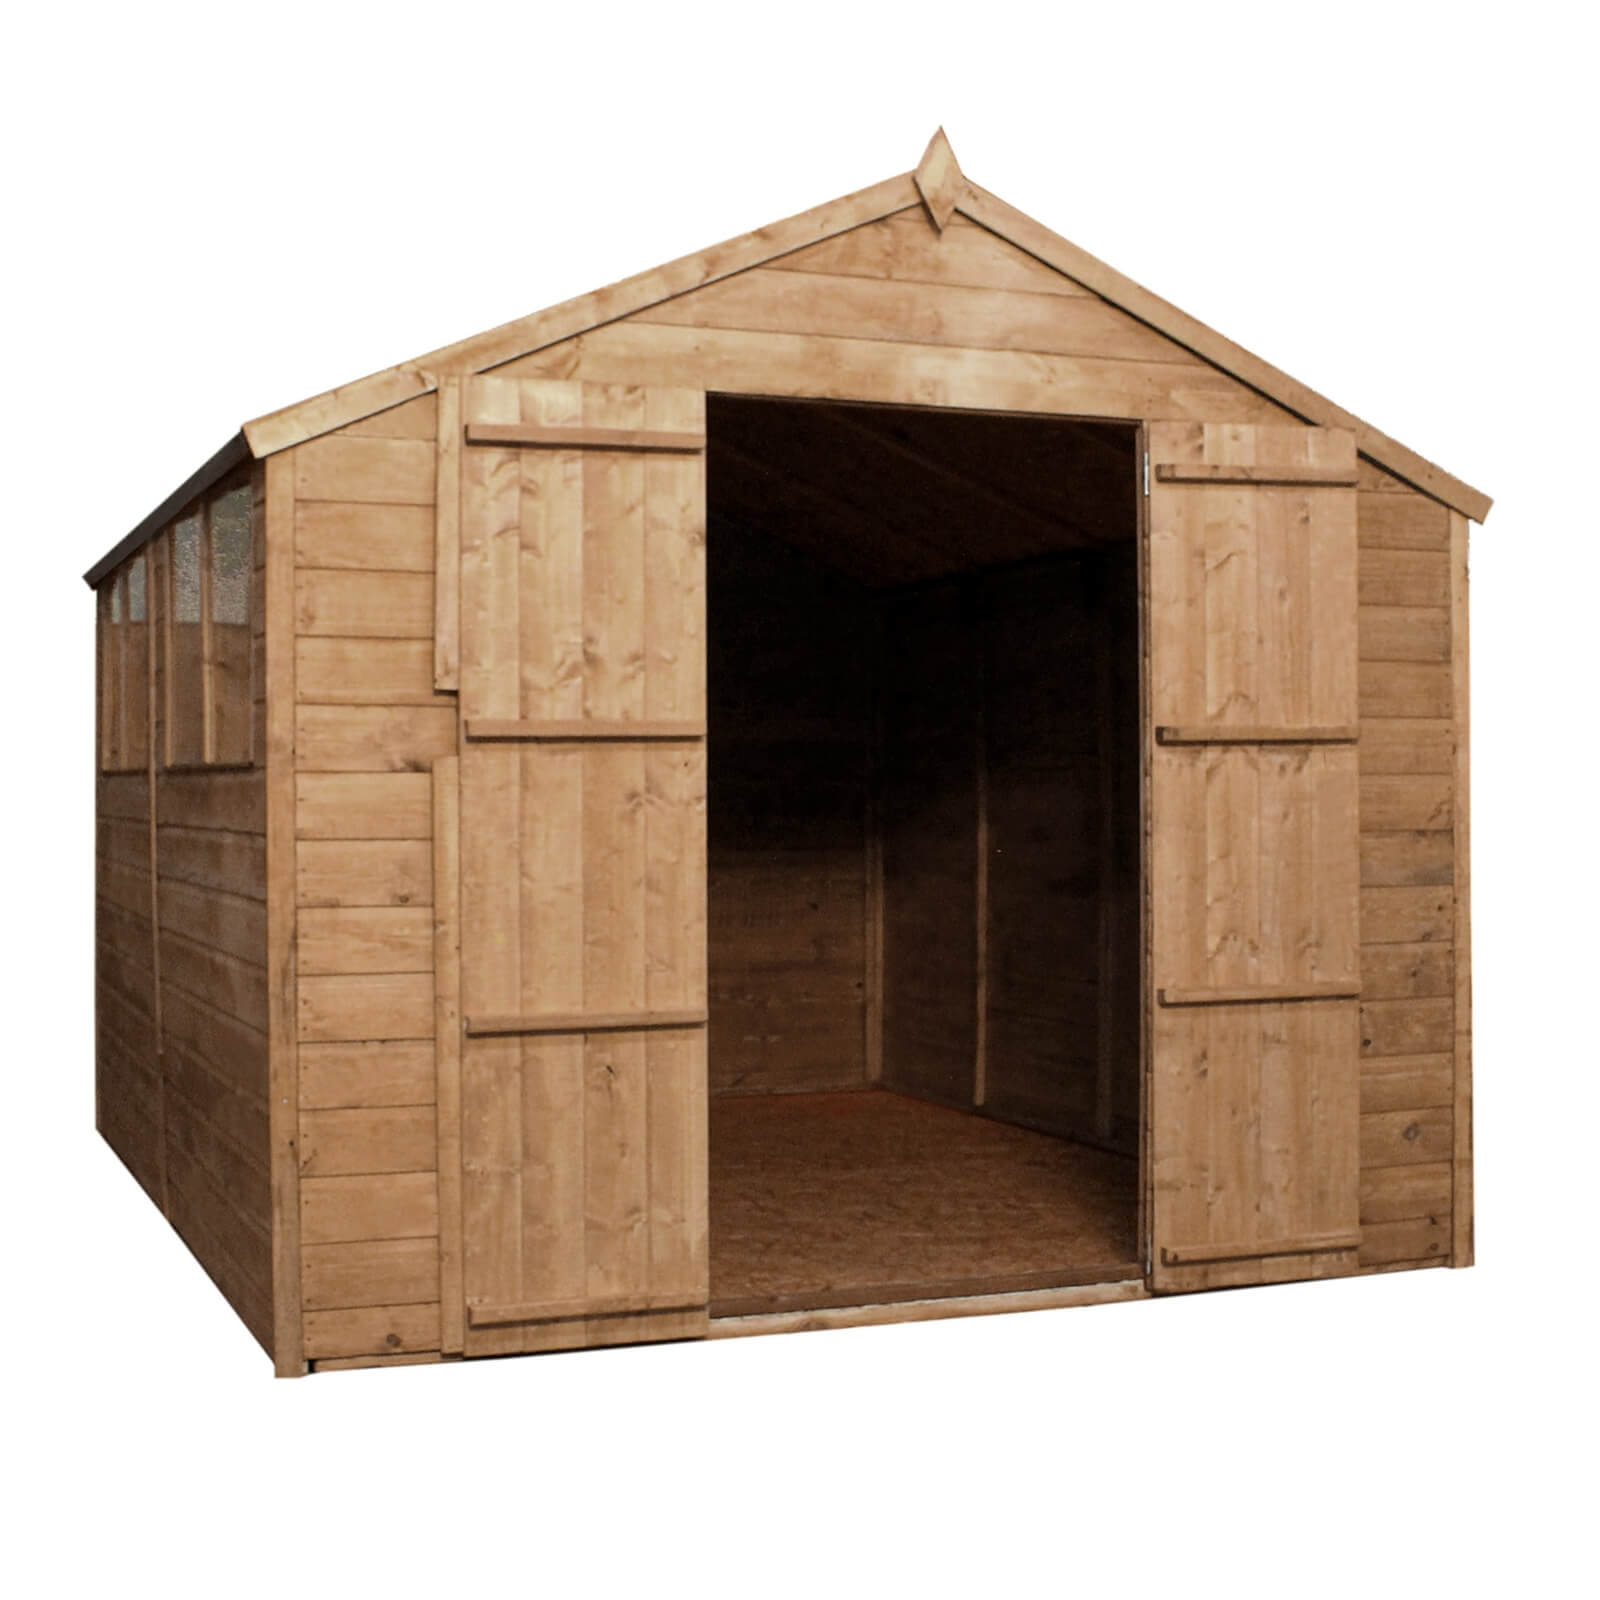 Mercia 12x8ft Pressure Treated Shiplap Apex Wooden Shed